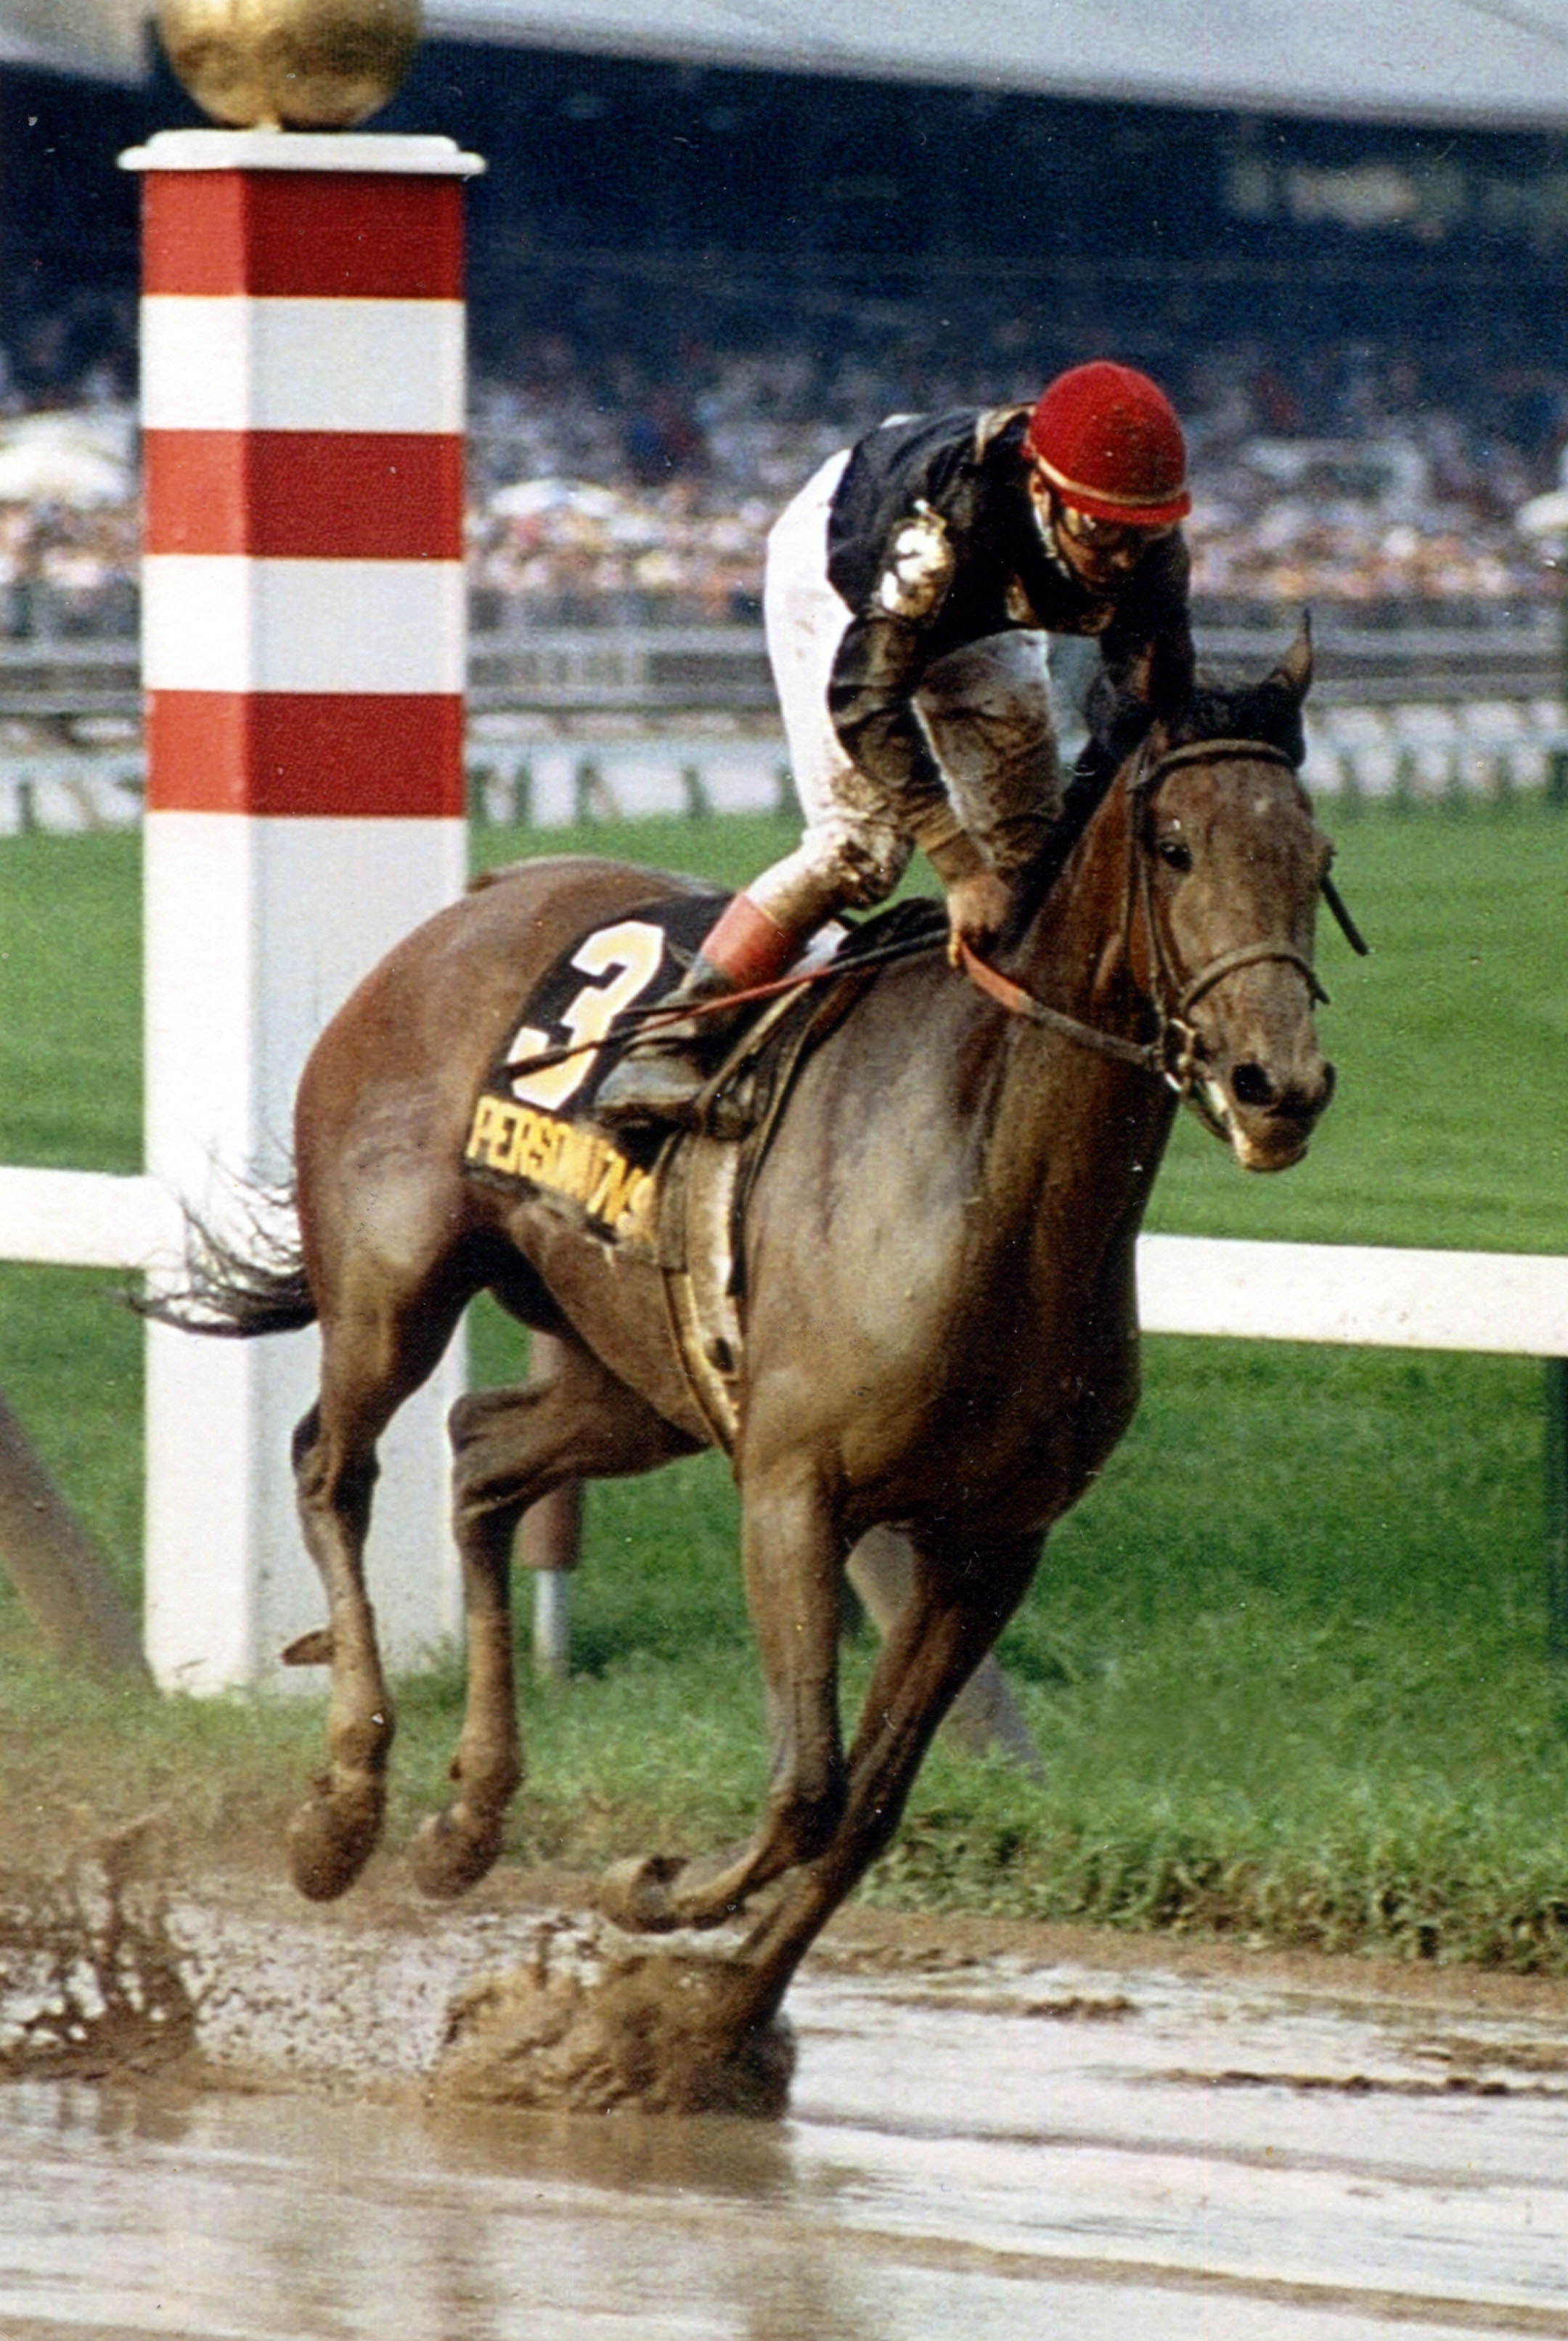 Personal Ensign (Randy Romero up) racing in the 1988 Whitney Handicap at Saratoga (Mike Pender/Museum Collection)